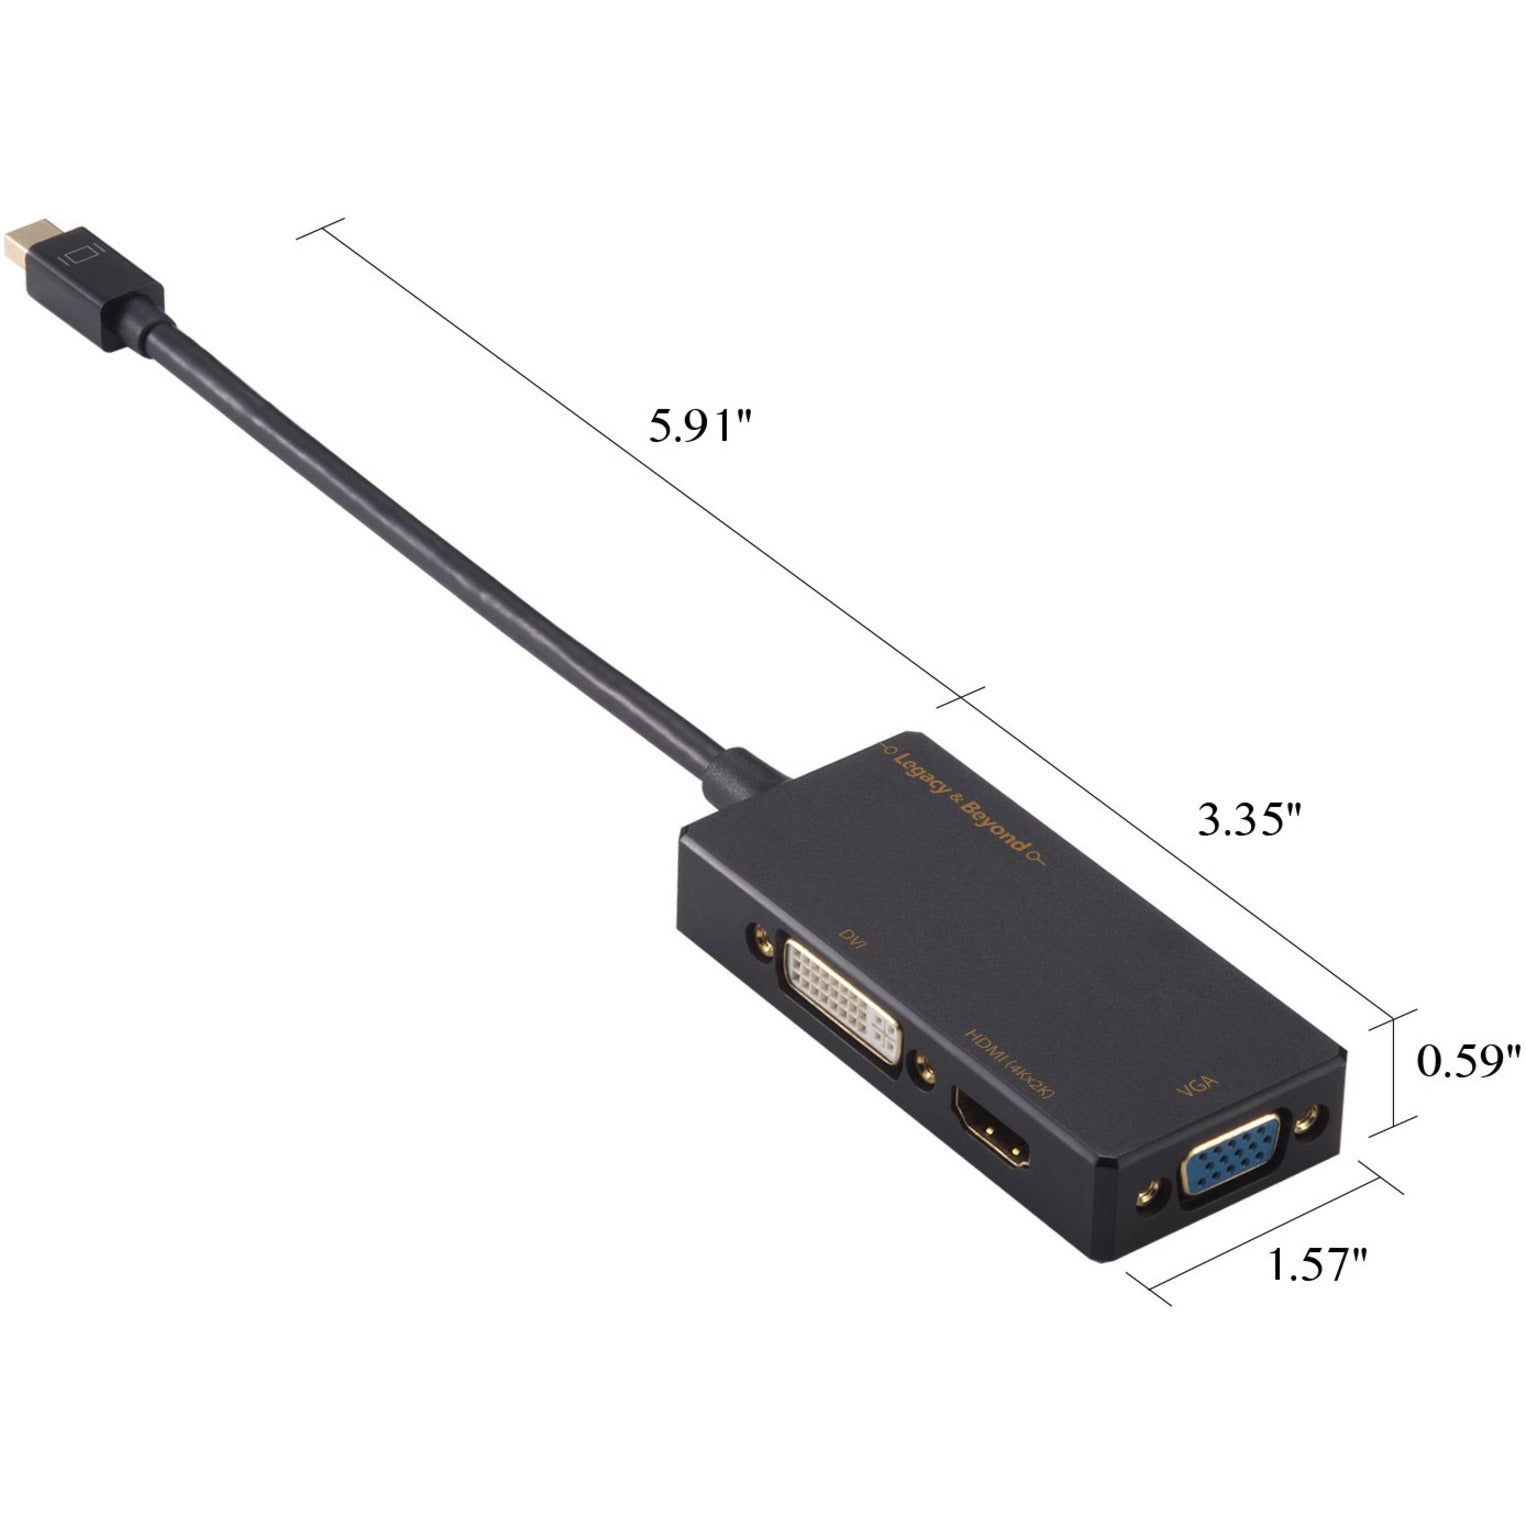 SIIG LB-CD0014-S1 Mini DisplayPort to 4K HDMI/DVI/VGA 3-in-1 Adapter, Corrosion Resistant, Gold Plated Connectors